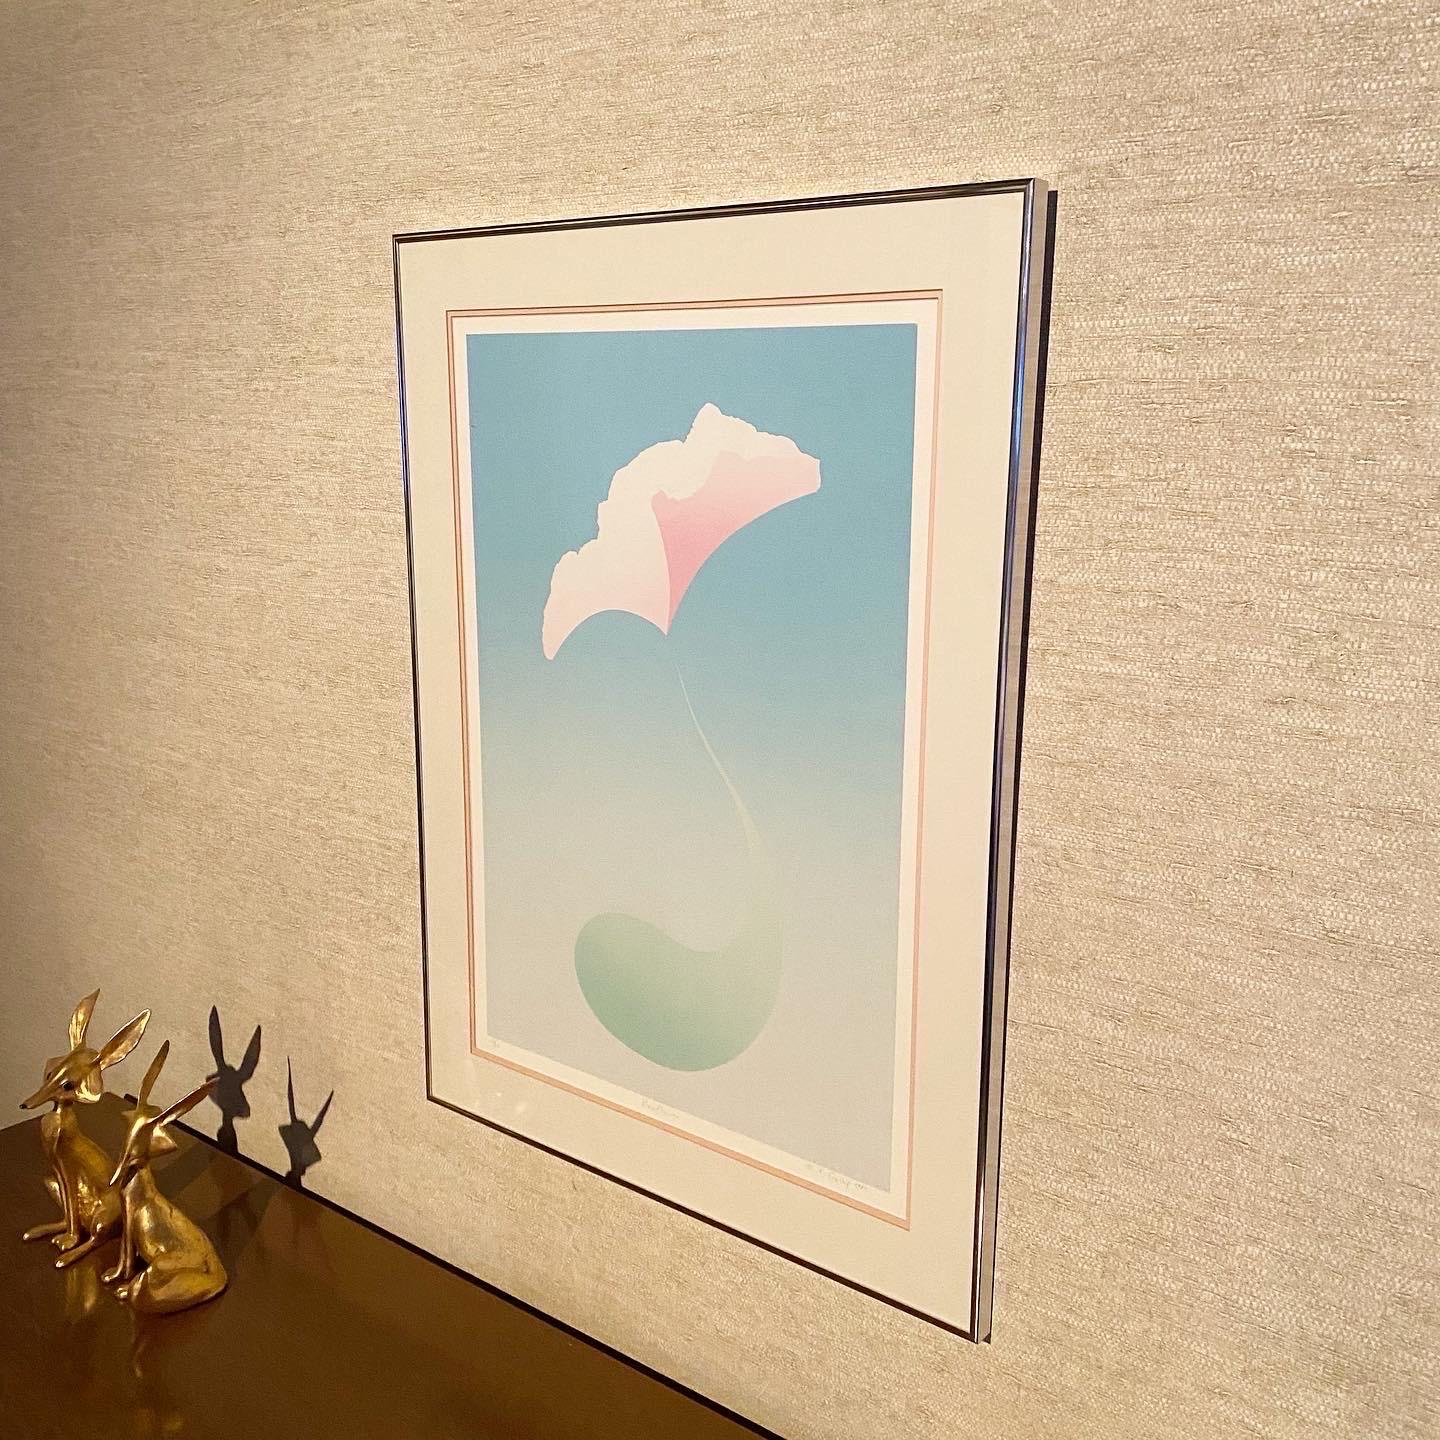 This is a gorgeous pair of  1980’s postmodern large framed lithographs by artist R. Gallup. Signed and numbered in pencil by the artist. 
“Rainflower” 12/20, 1982. pictured left: 24.75” wide x 32.75” high. 
 “Rainflowering” - 10/20, 1983. pictured